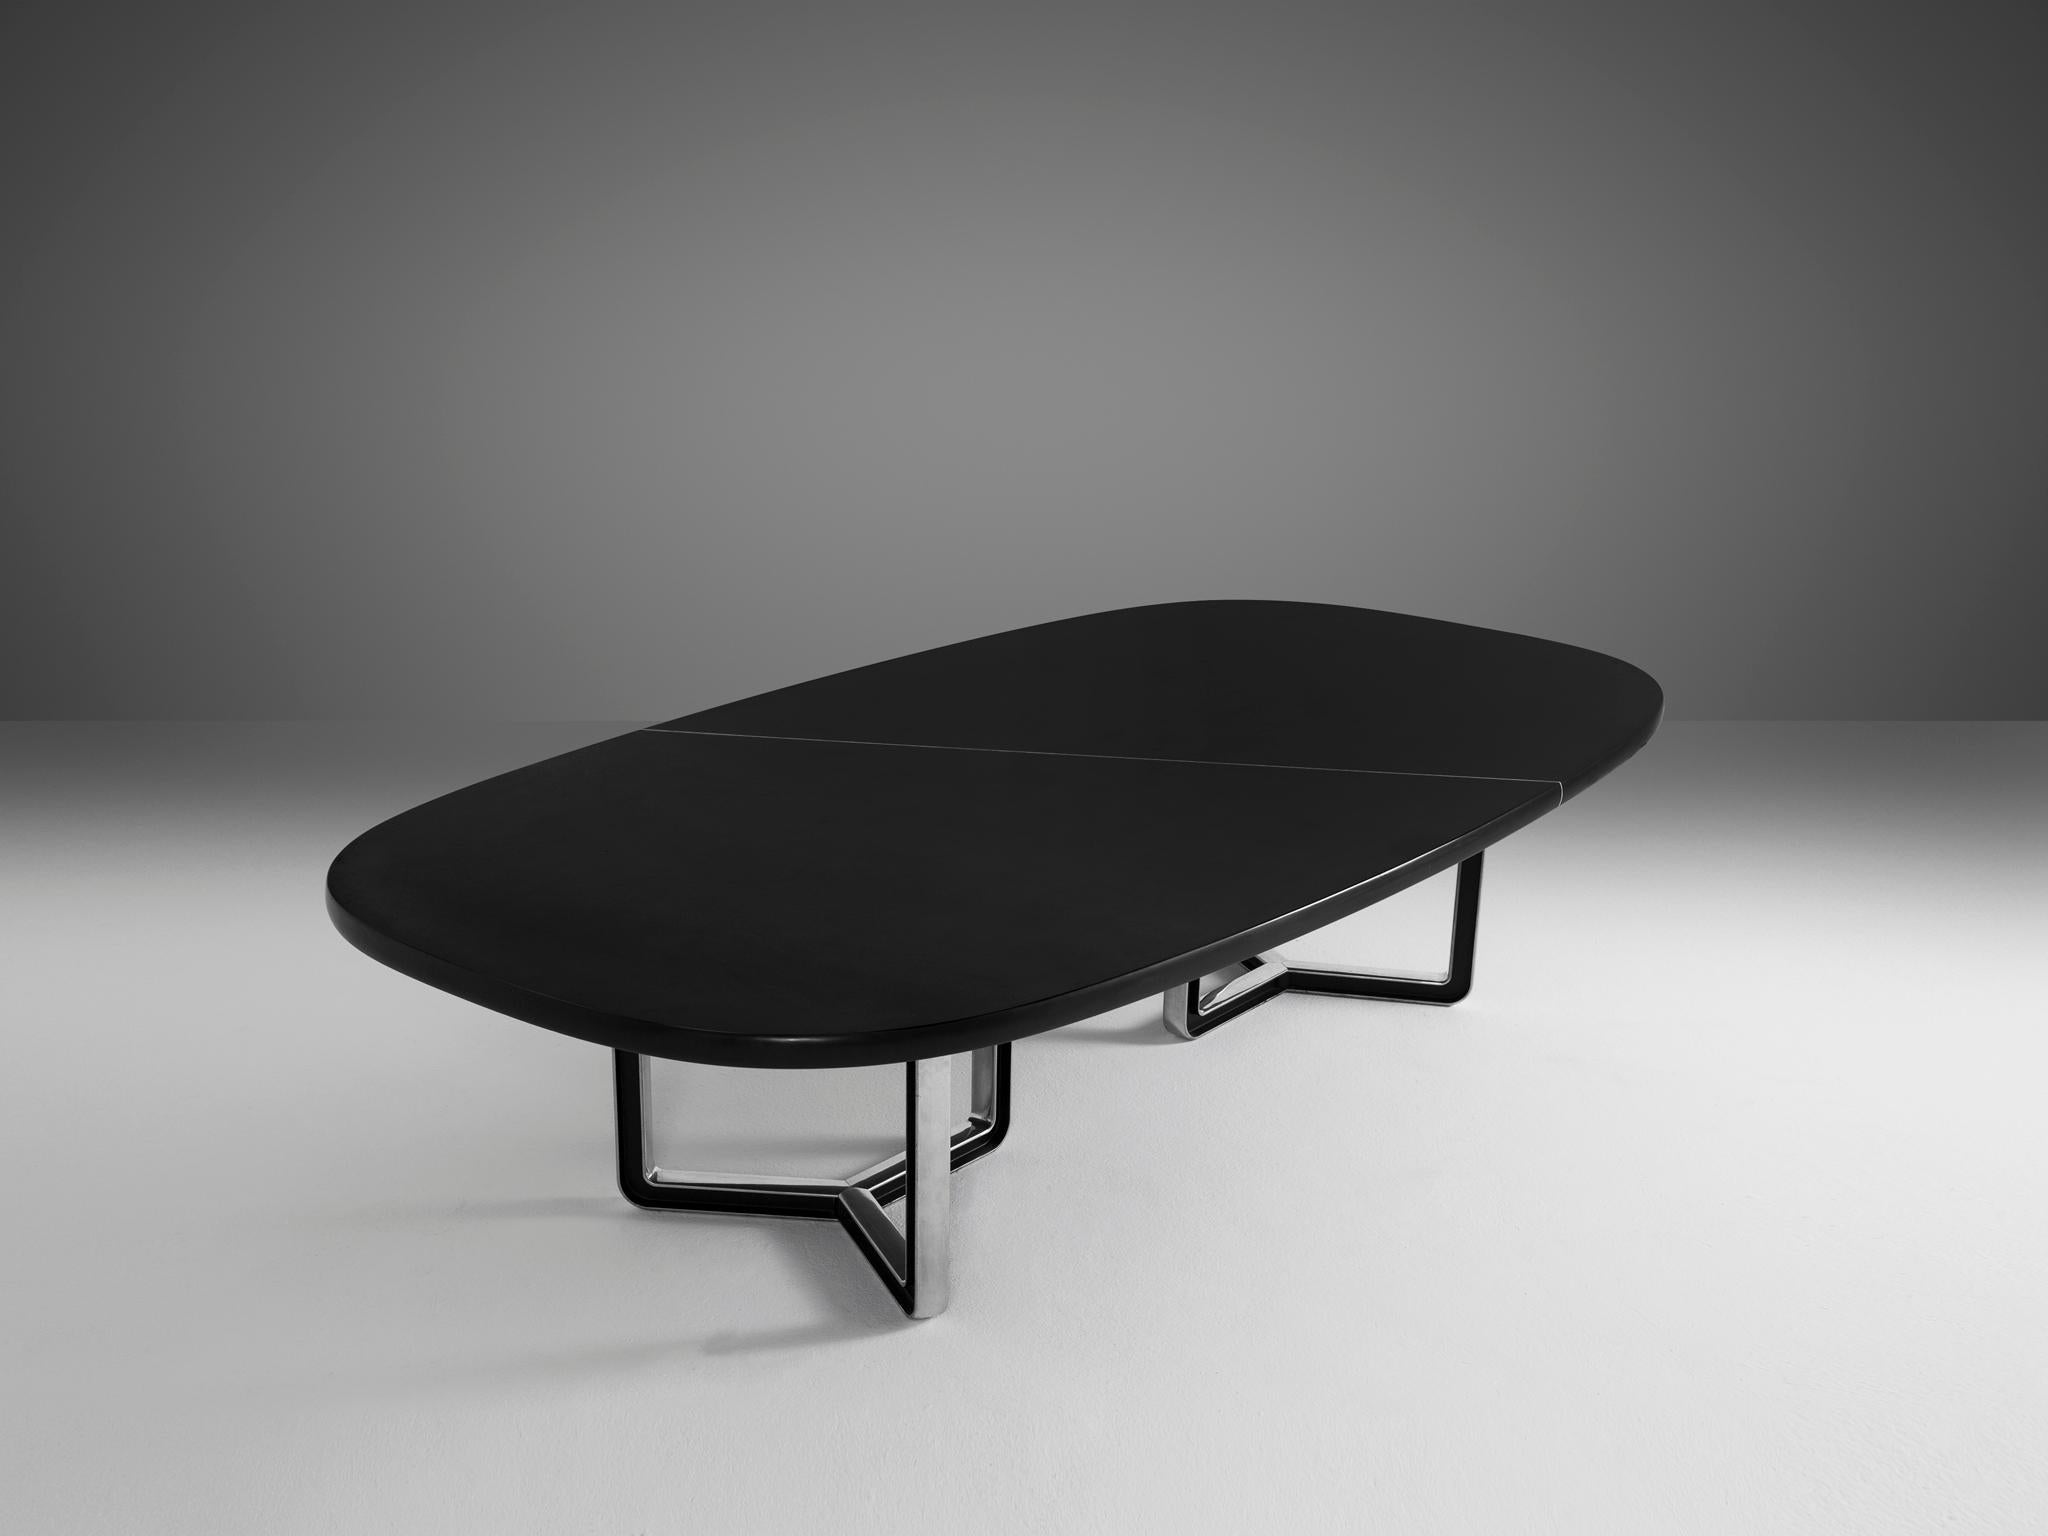 Tecno Design Centre for Tecno, conference table 335a, black lacquered wood, aluminum, Italy, 1975-1978

Large conference table with a black top. The table is composed of two parts that are connected via a white line. The tabletop rests on two